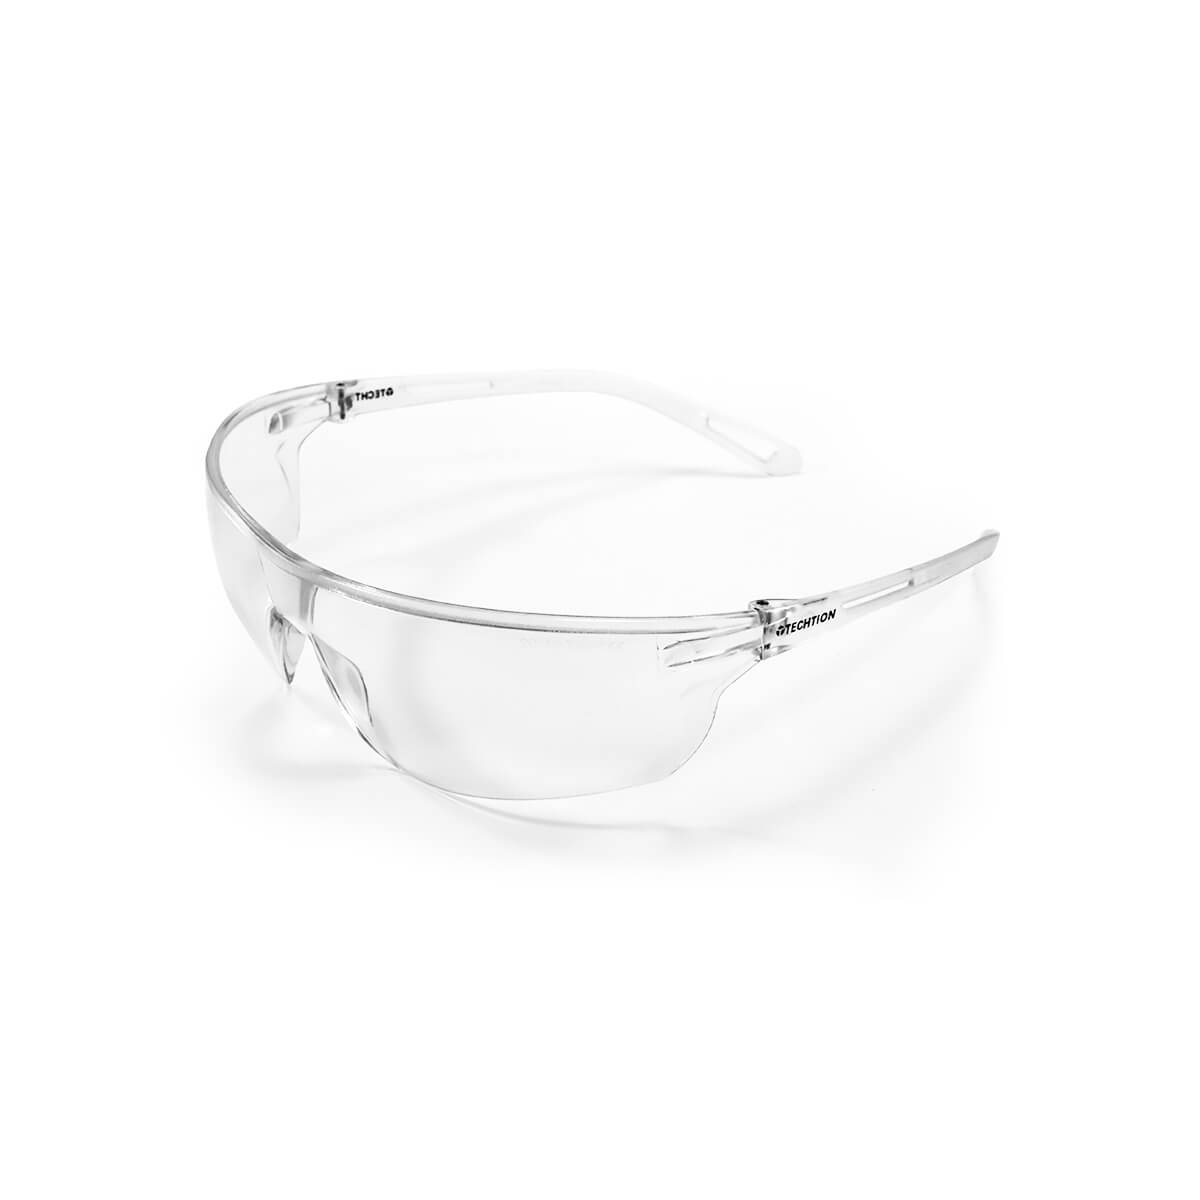 Buy SAFETY SPECTACLES - TECHTION - OPTEC Online | Safety | Qetaat.com